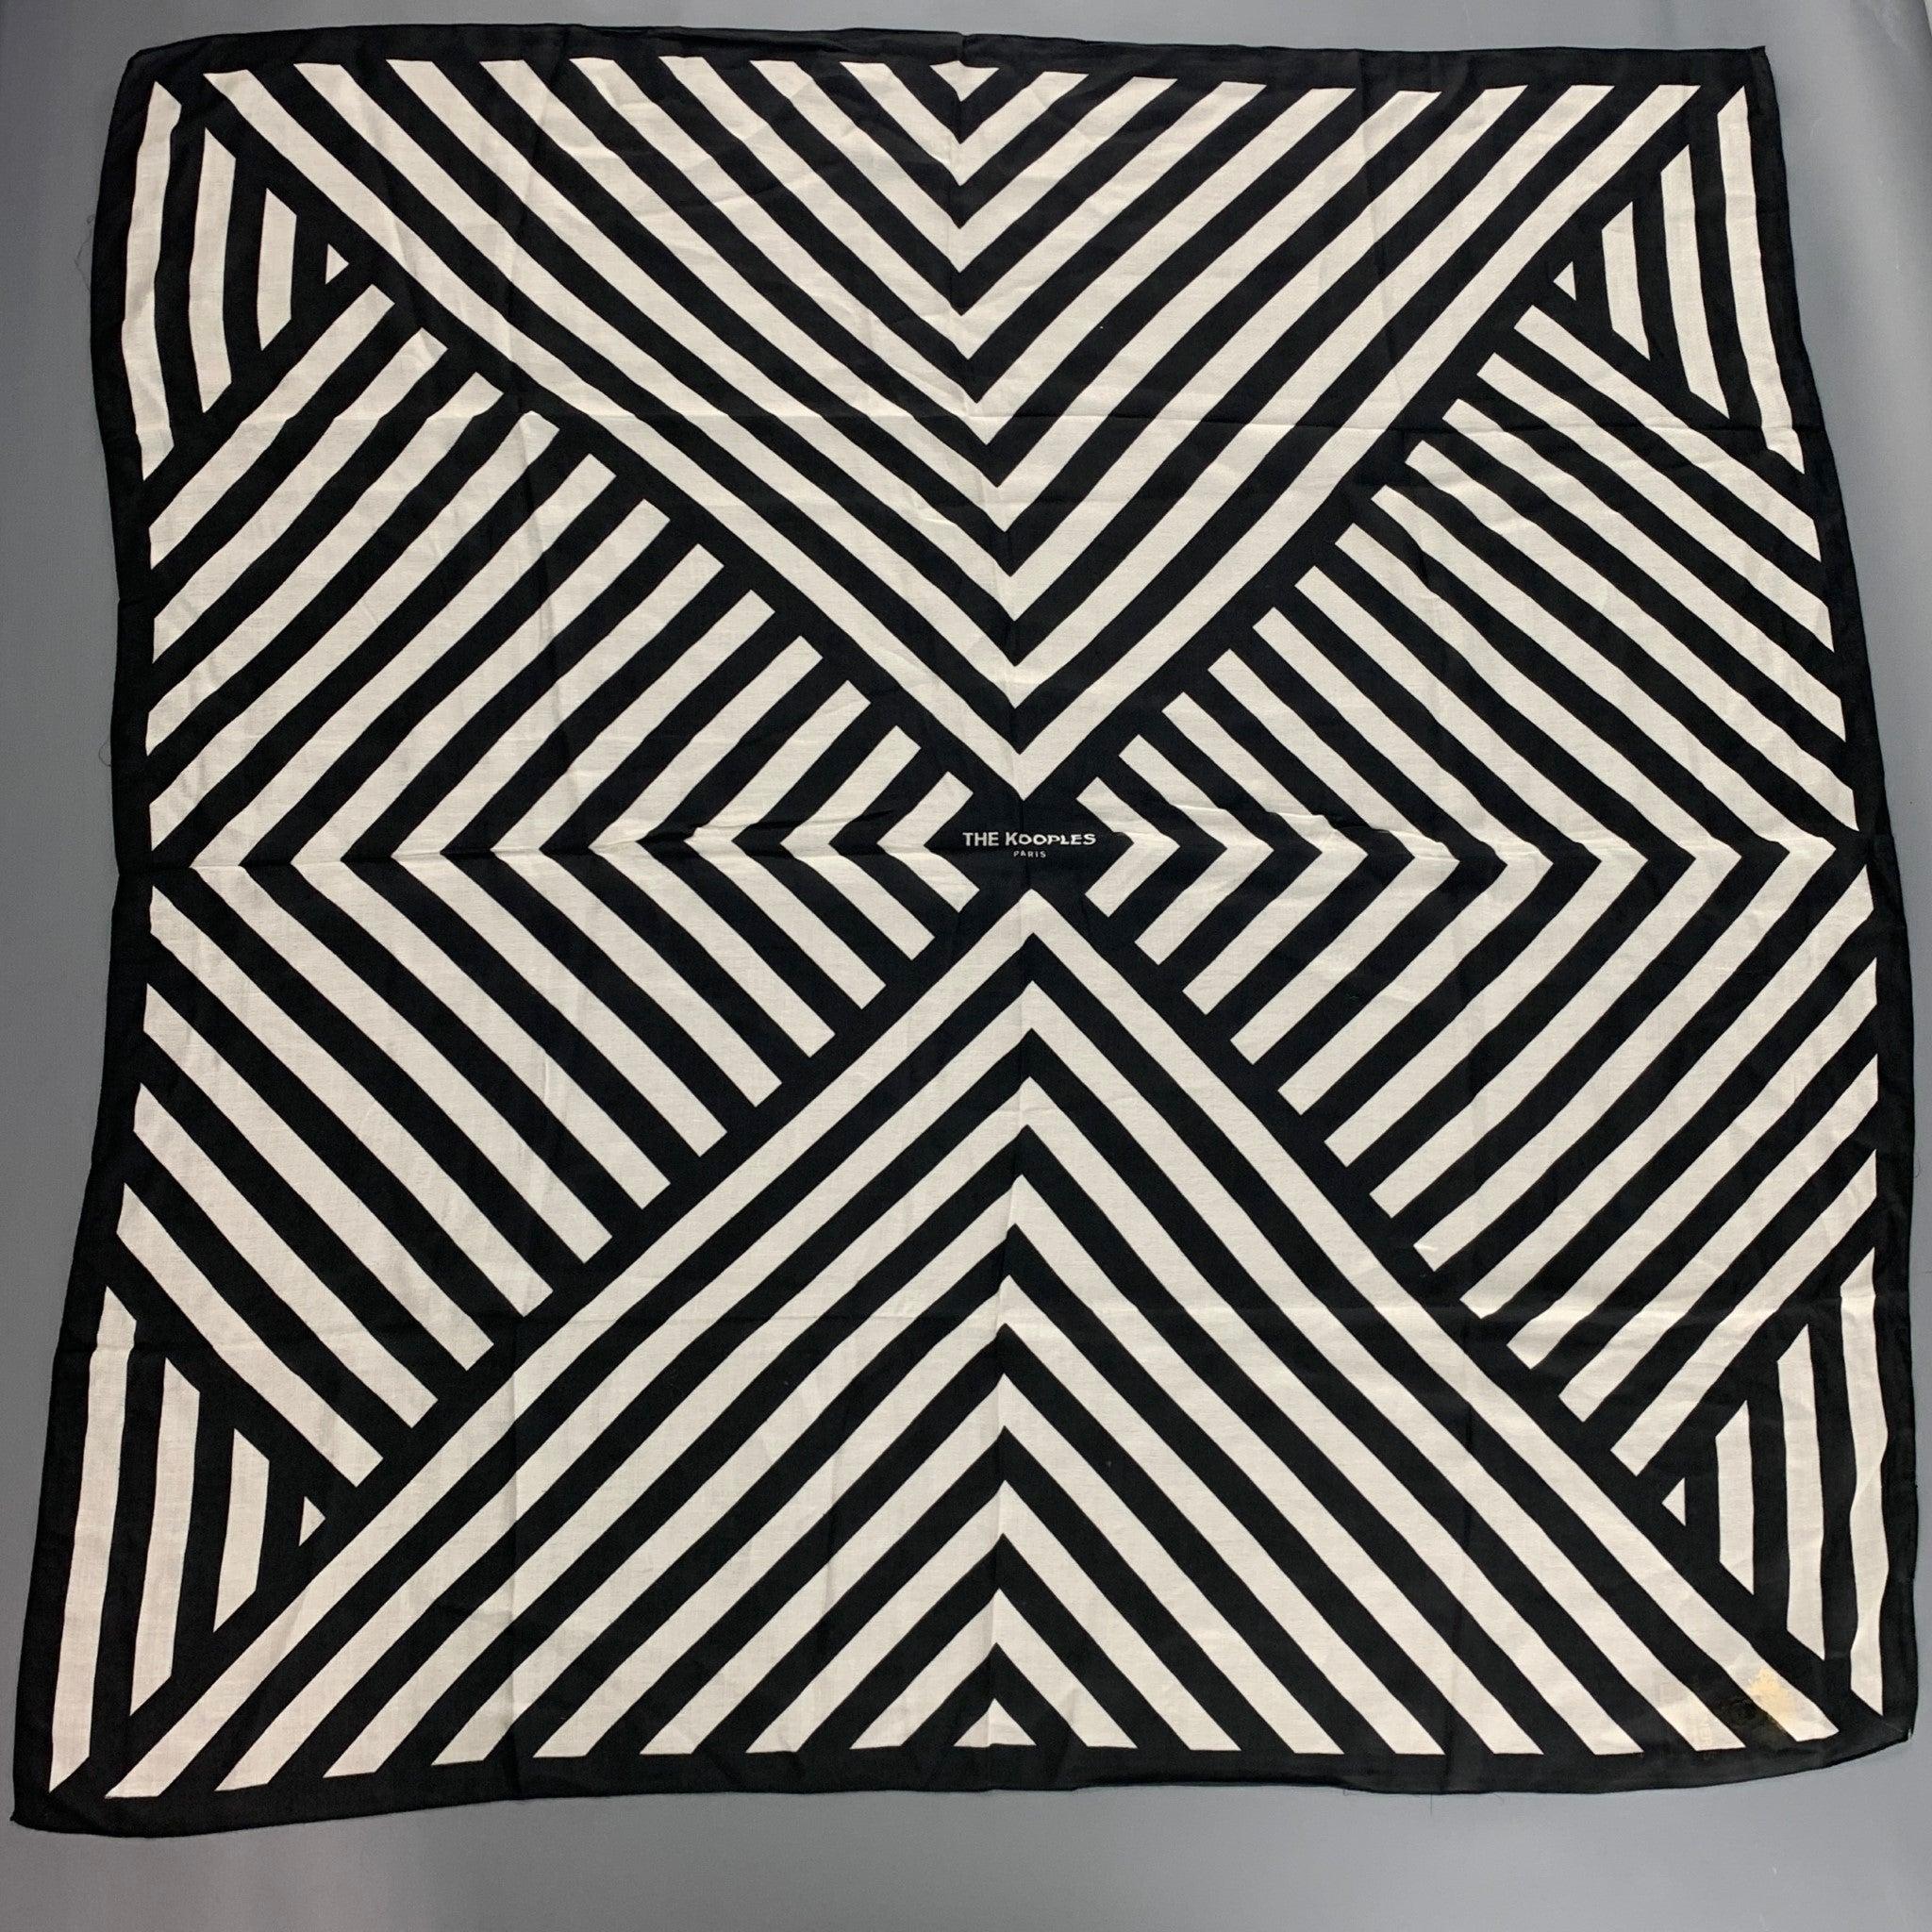 THE KOOPLES
scarf in a black and white woven fabric, featuring stripe pattern and logo.Excellent Pre-Owned Condition. 

Measurements: 
  41 inches  x 41 inches 
  
  
 
Reference: 126299
Category: Scarves & Shawls
More Details
    
Brand:  THE